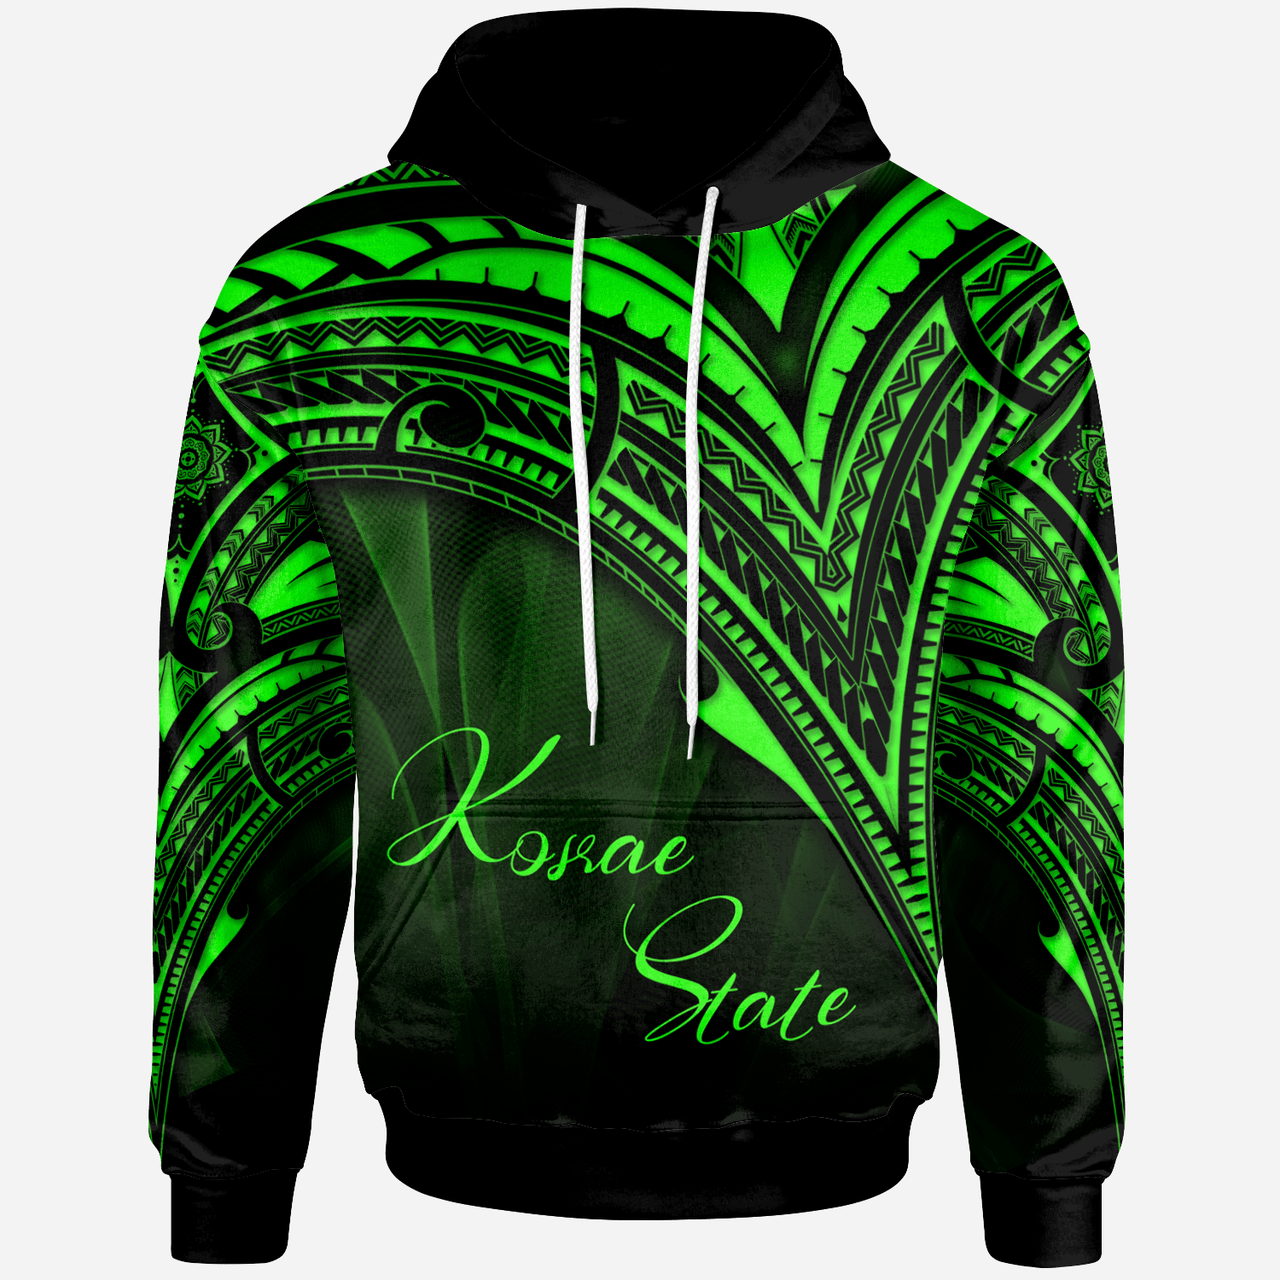 Kosrae State Hoodie - Green Color Cross Style